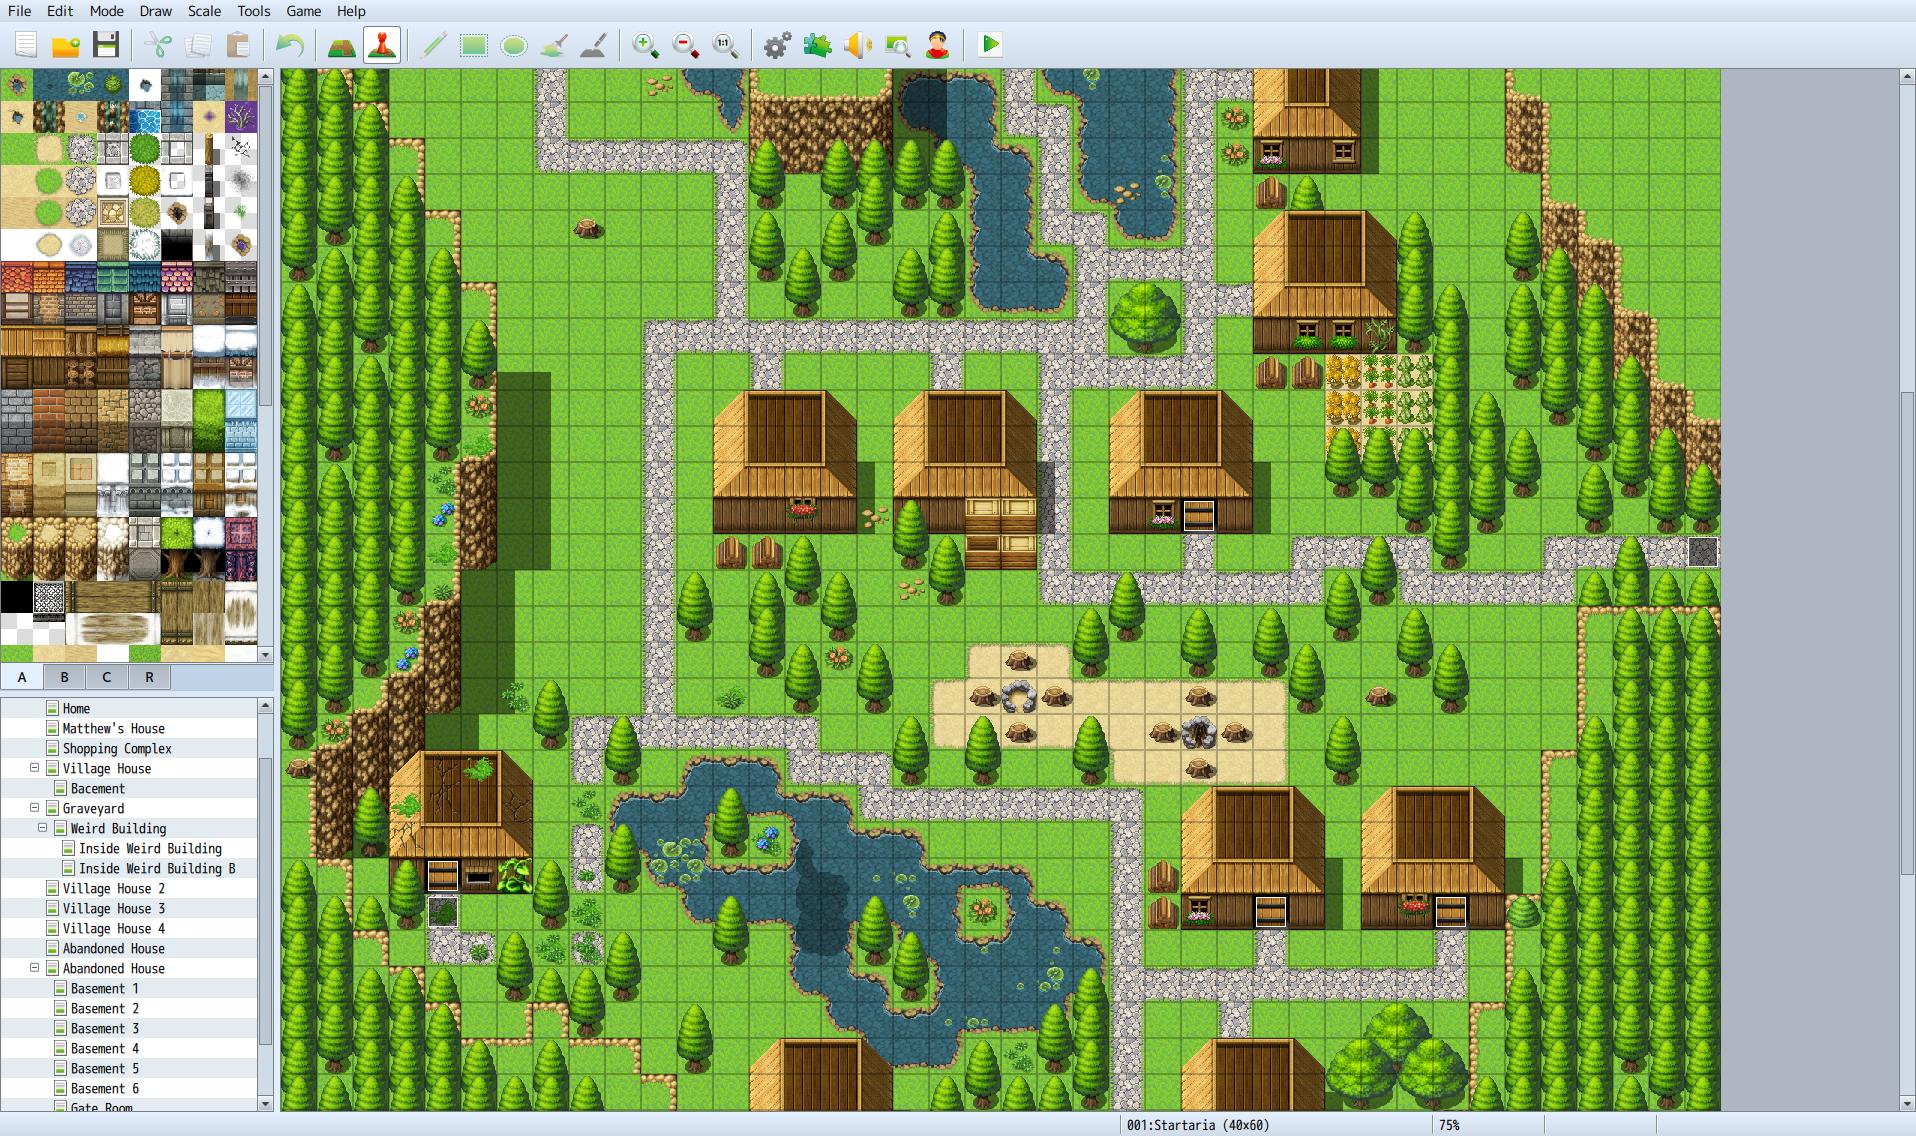 Ah... ye olde starting town. This took a long time to setup and I'm still not satisfied with it.